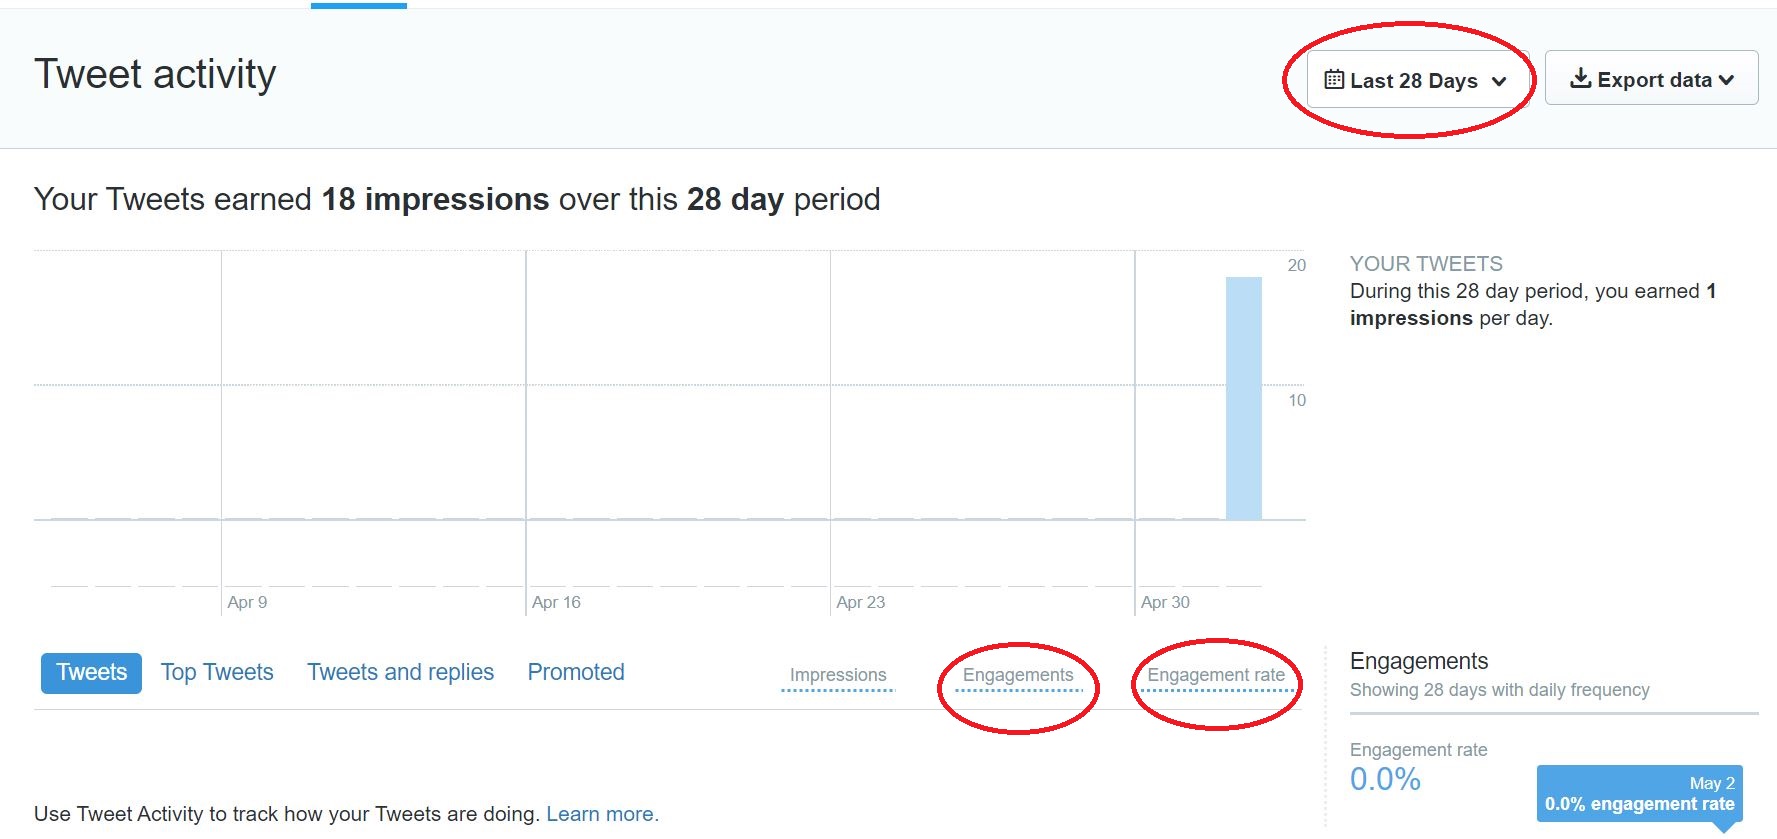 Where to find twitter Impressions data